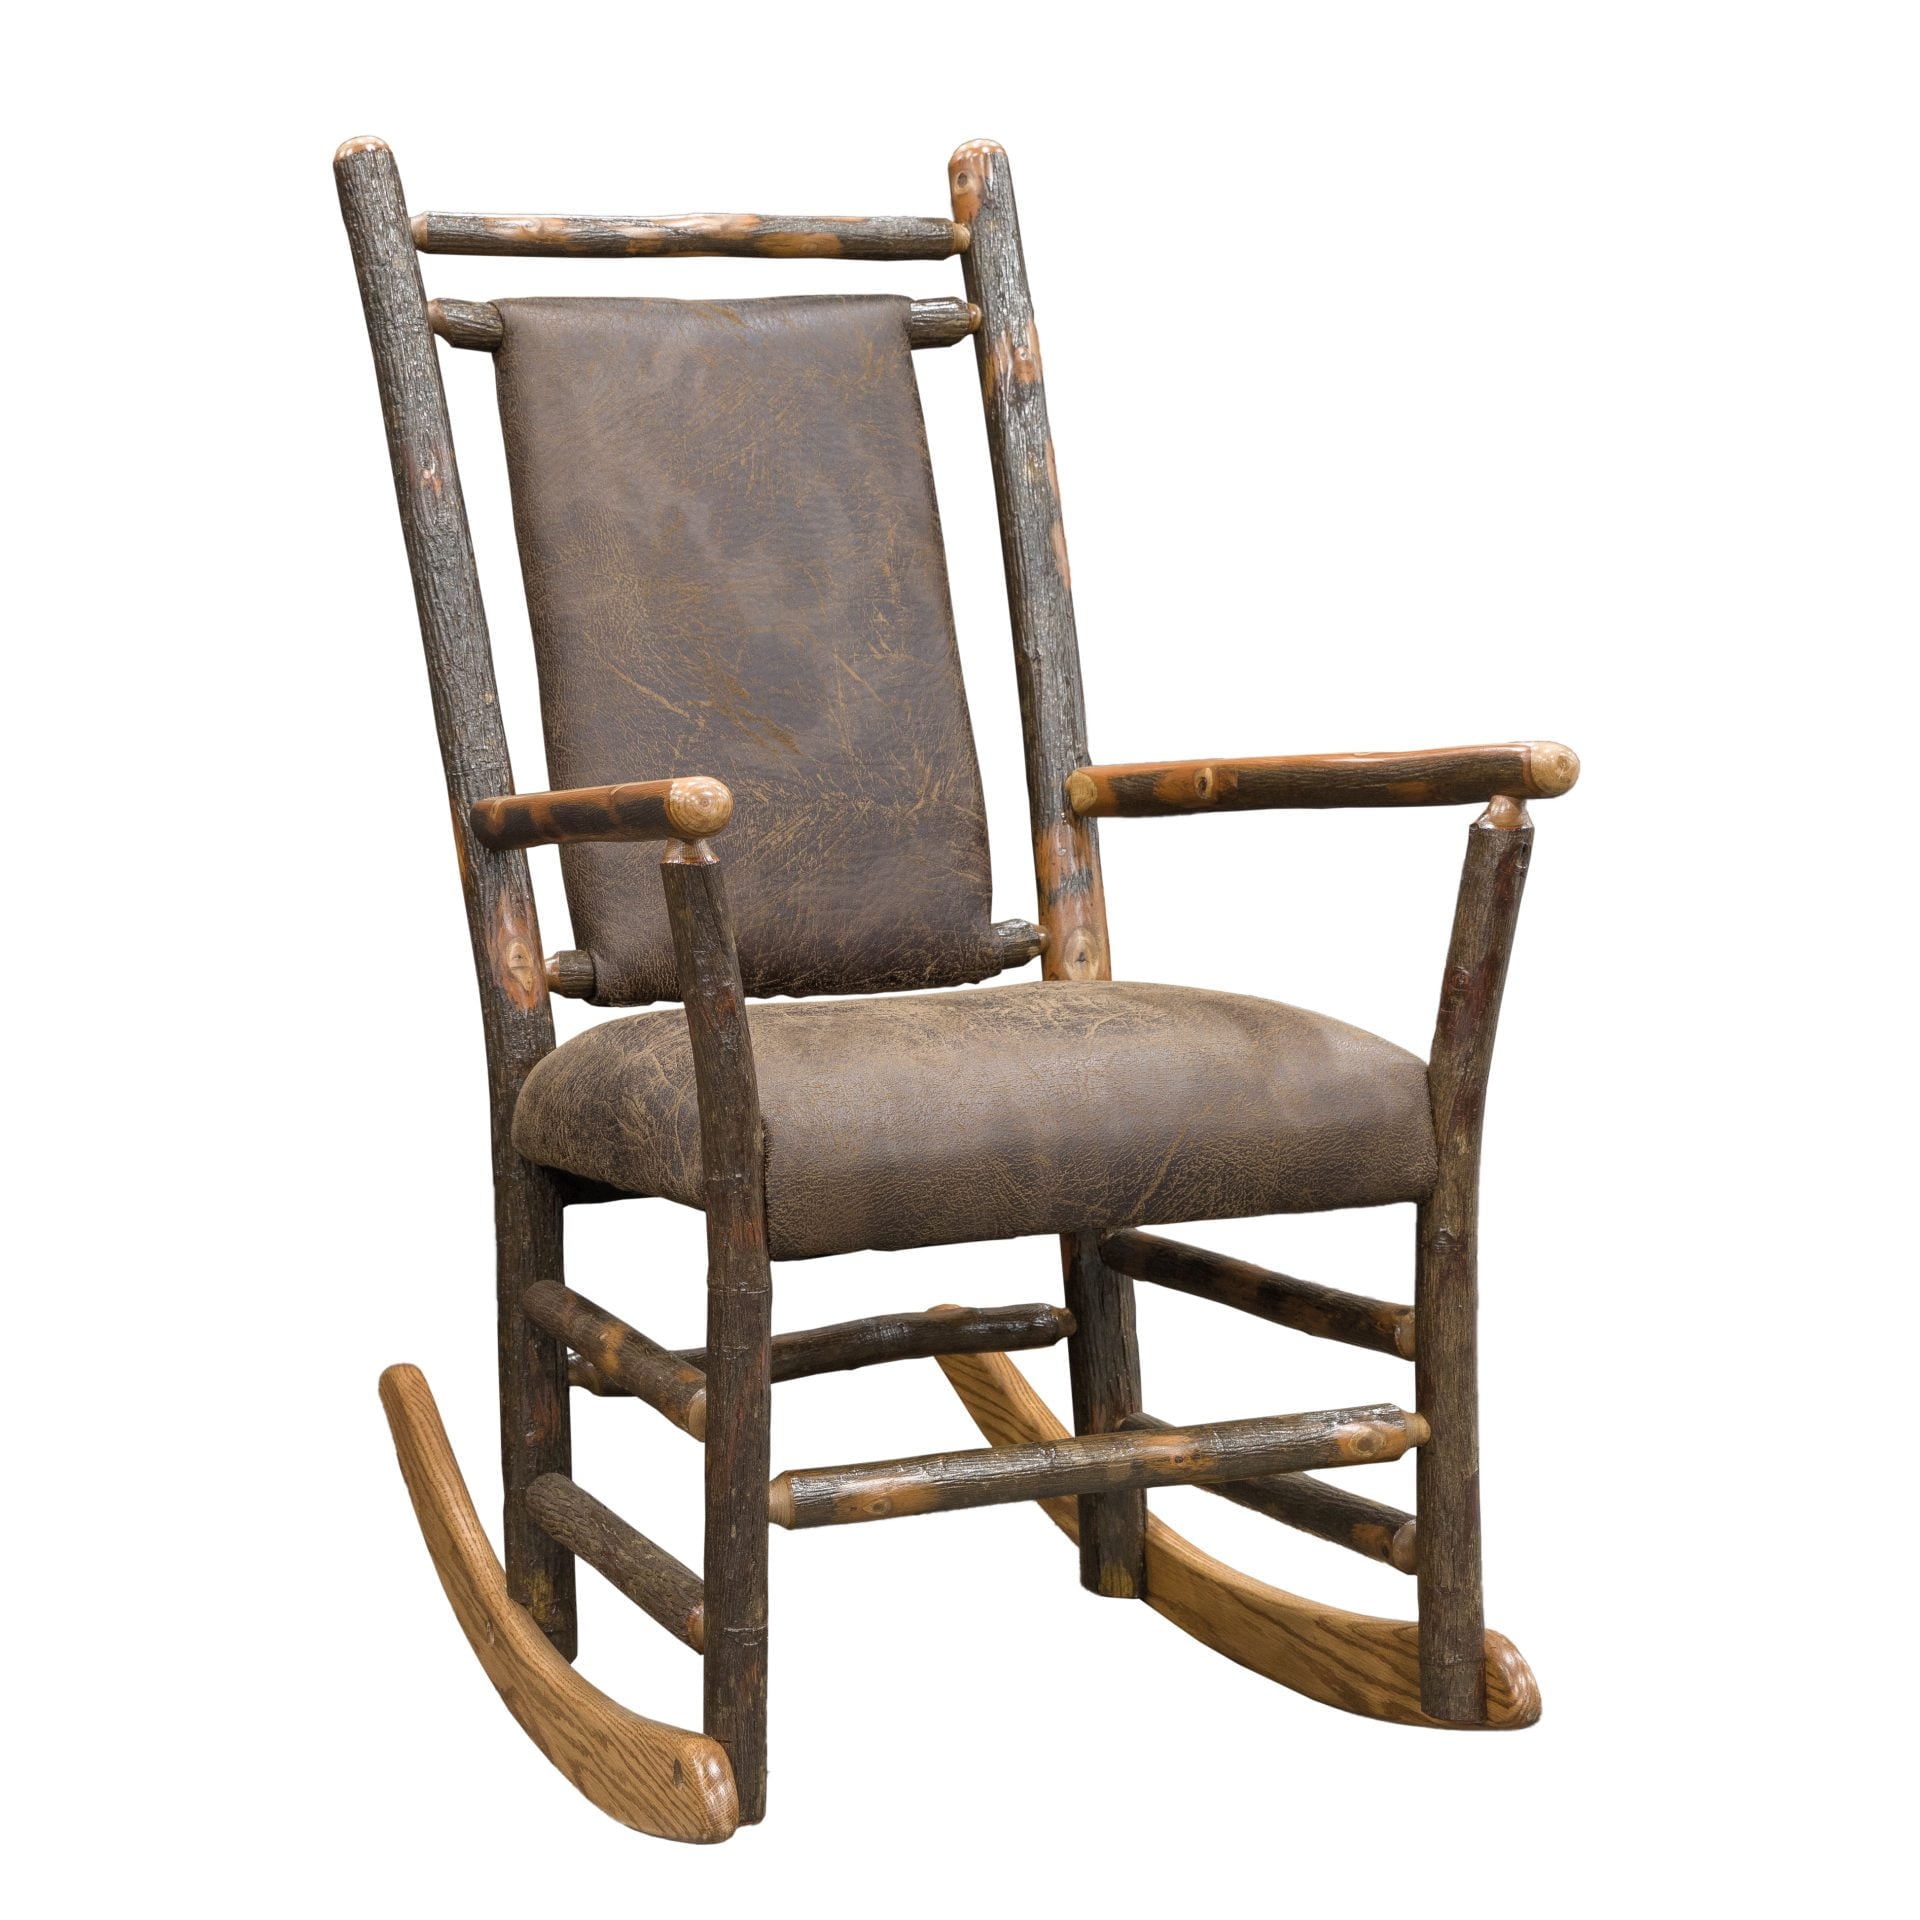 Rustic Hickory Rocking Chair